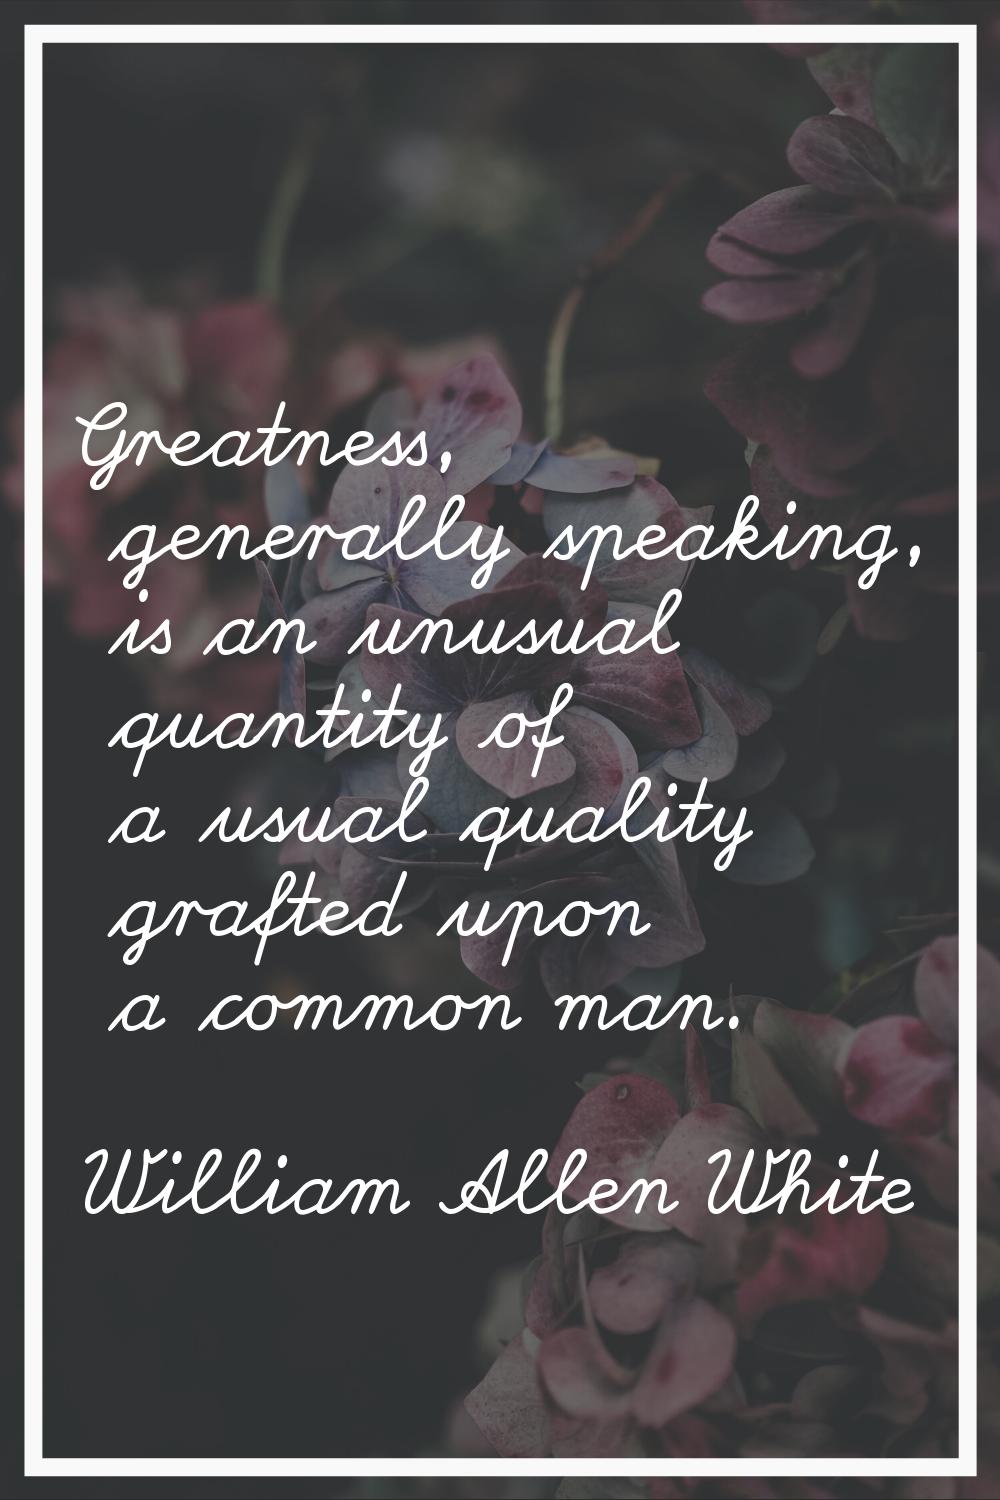 Greatness, generally speaking, is an unusual quantity of a usual quality grafted upon a common man.